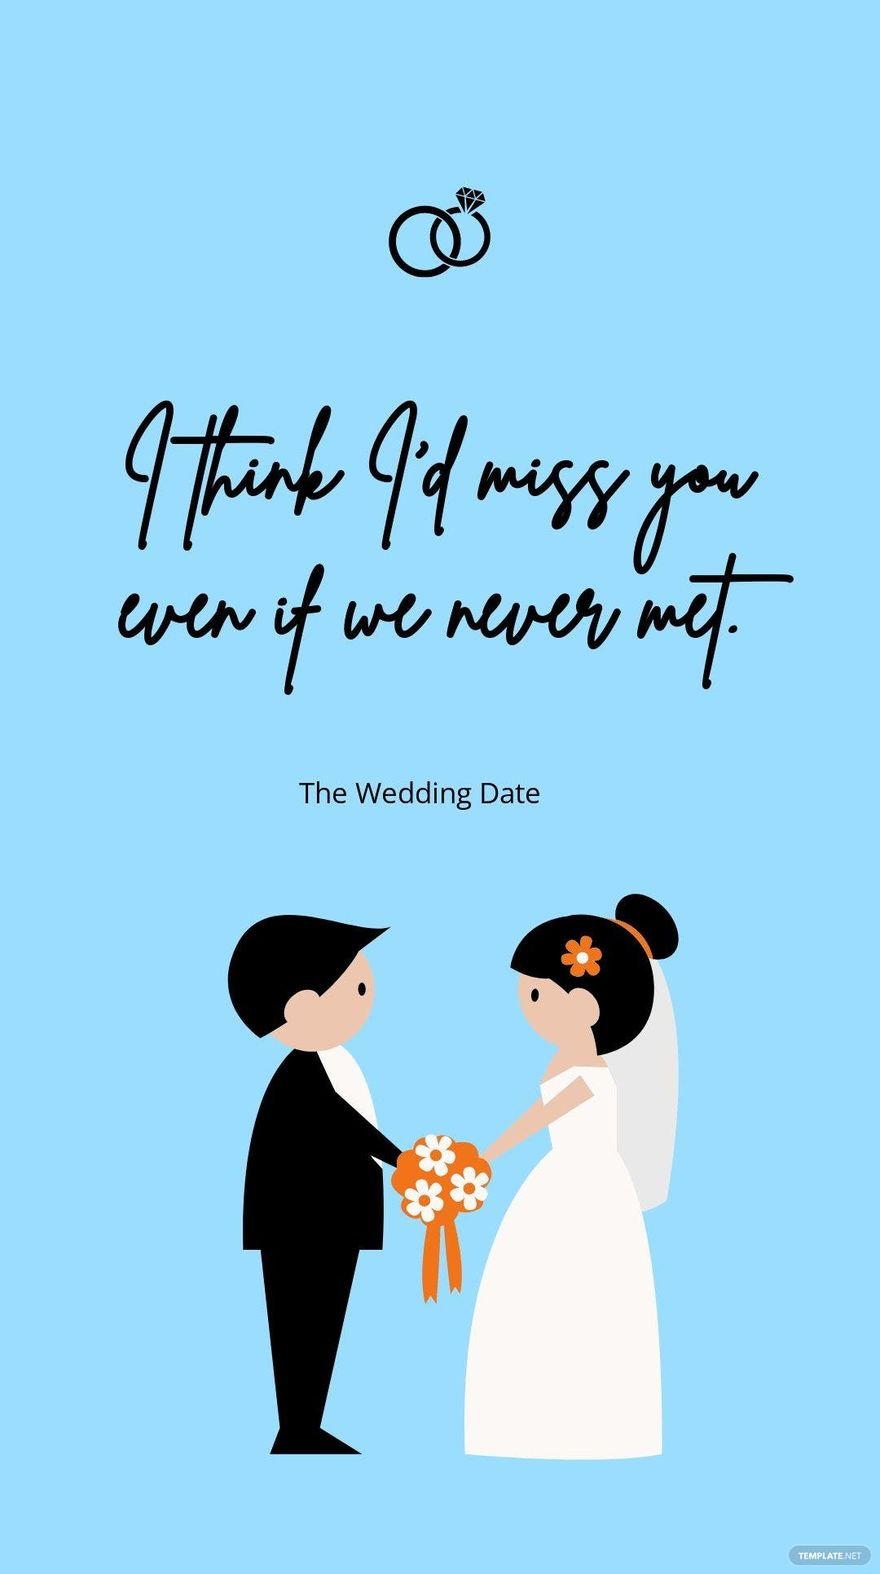 The Wedding Date - “I think I’d miss you even if we never met.”